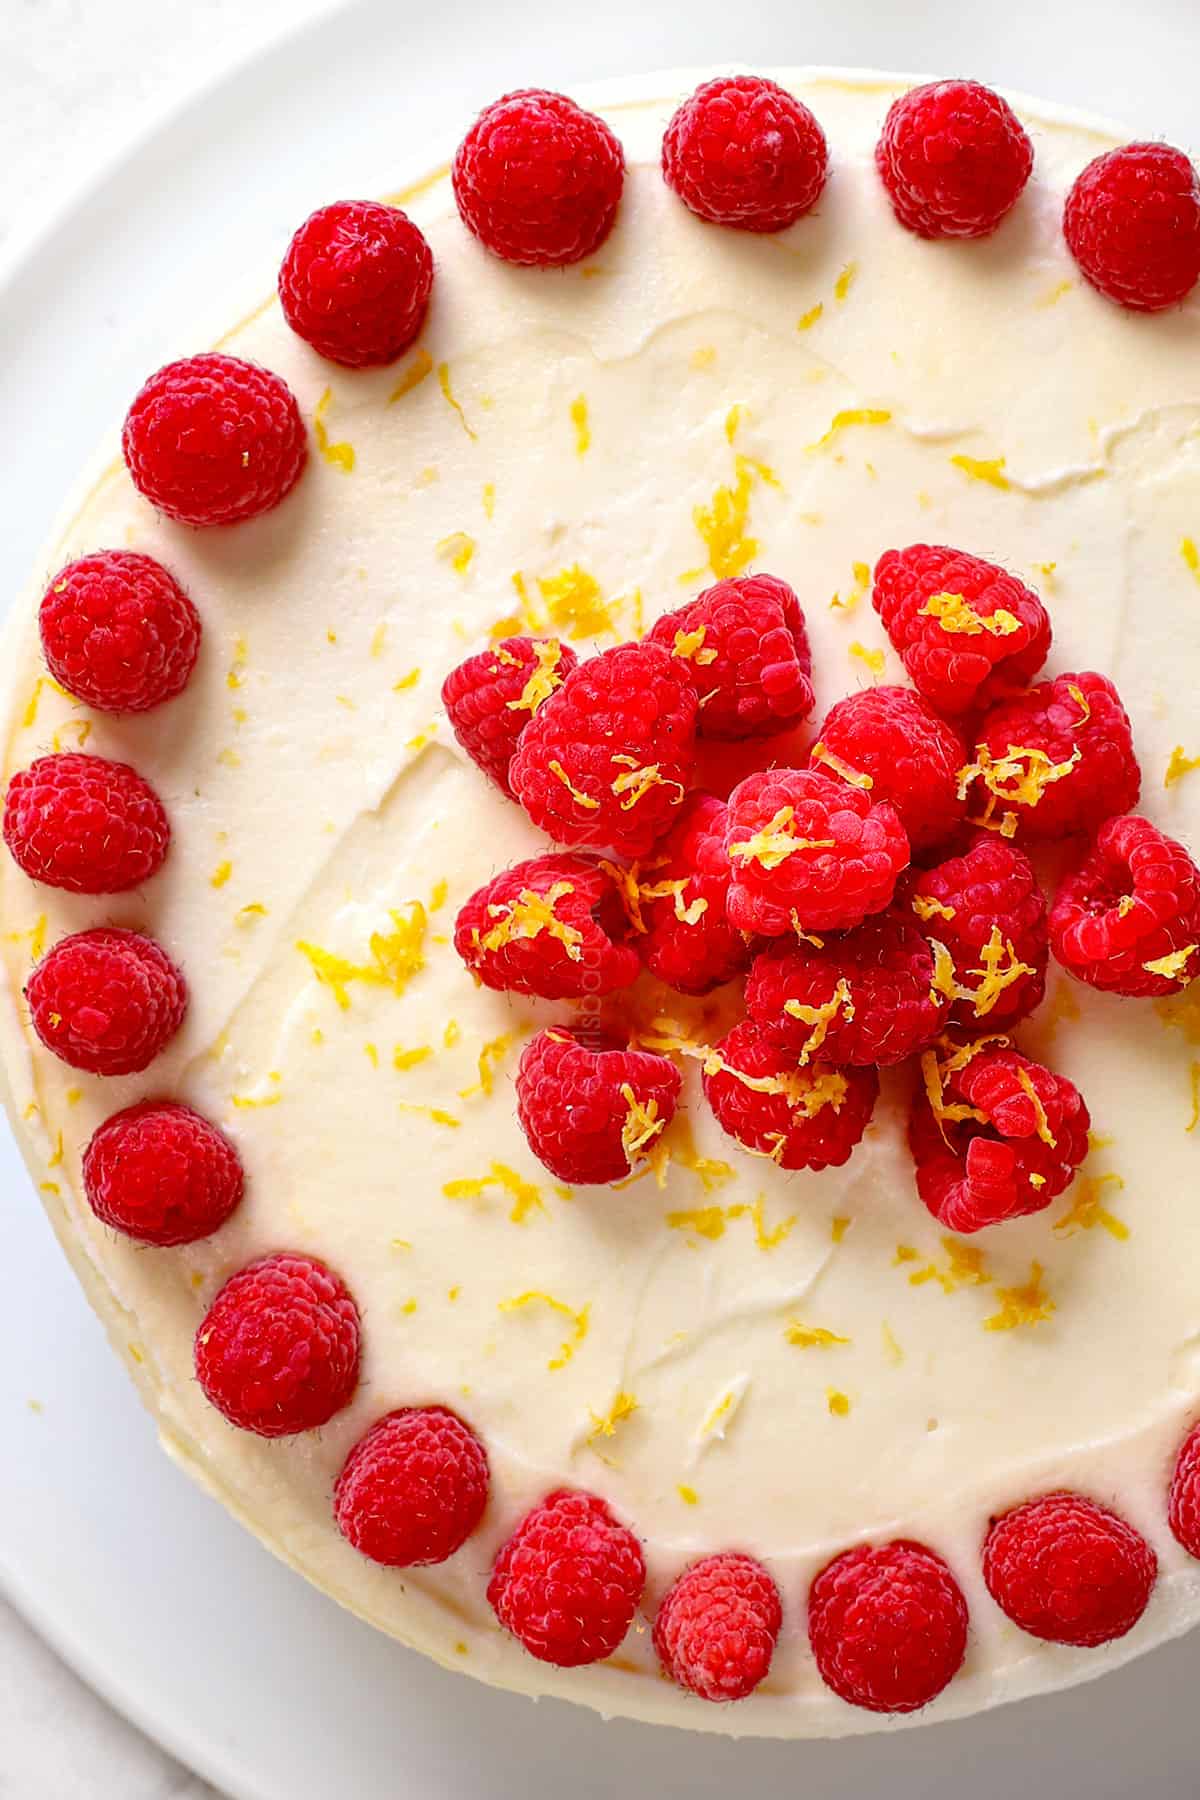 showing how to decorate Raspberry Lemon Cake by adding raspberries to the border and center of the top of the cake